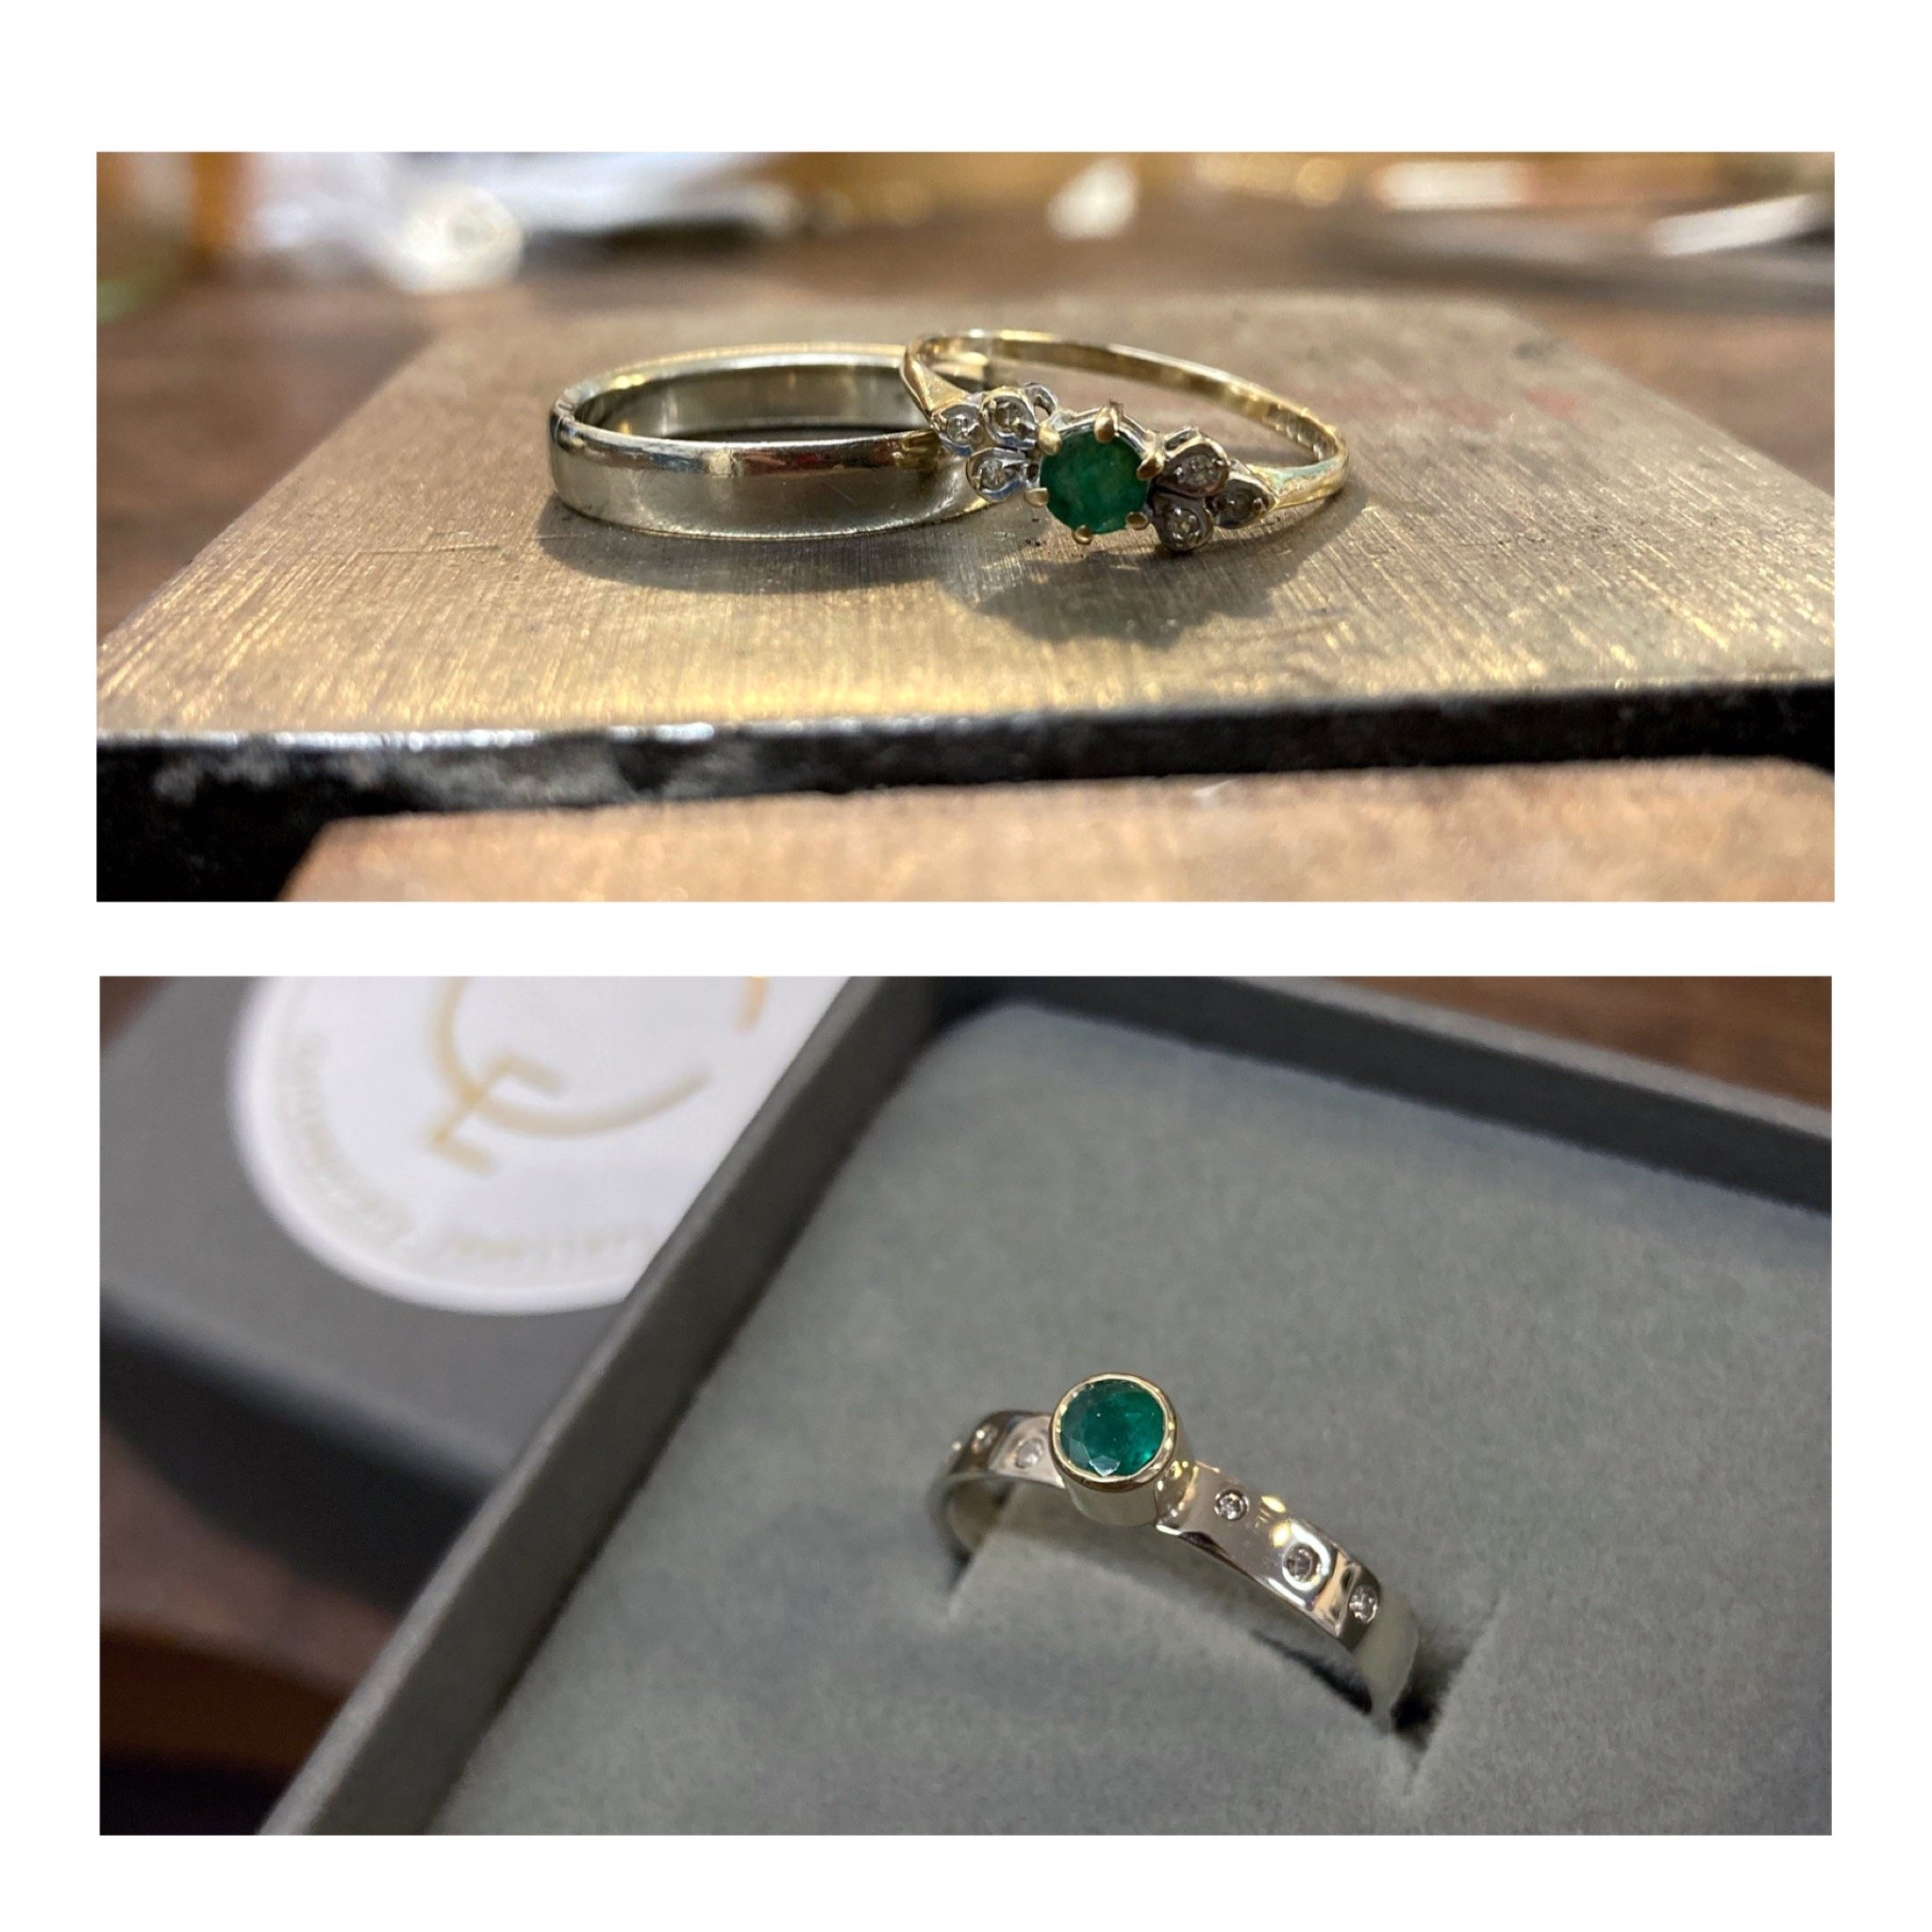 Re-Model of two heirloom rings into one. Emerald, diamonds 18ct white gold &amp; 9ct yellow gold.